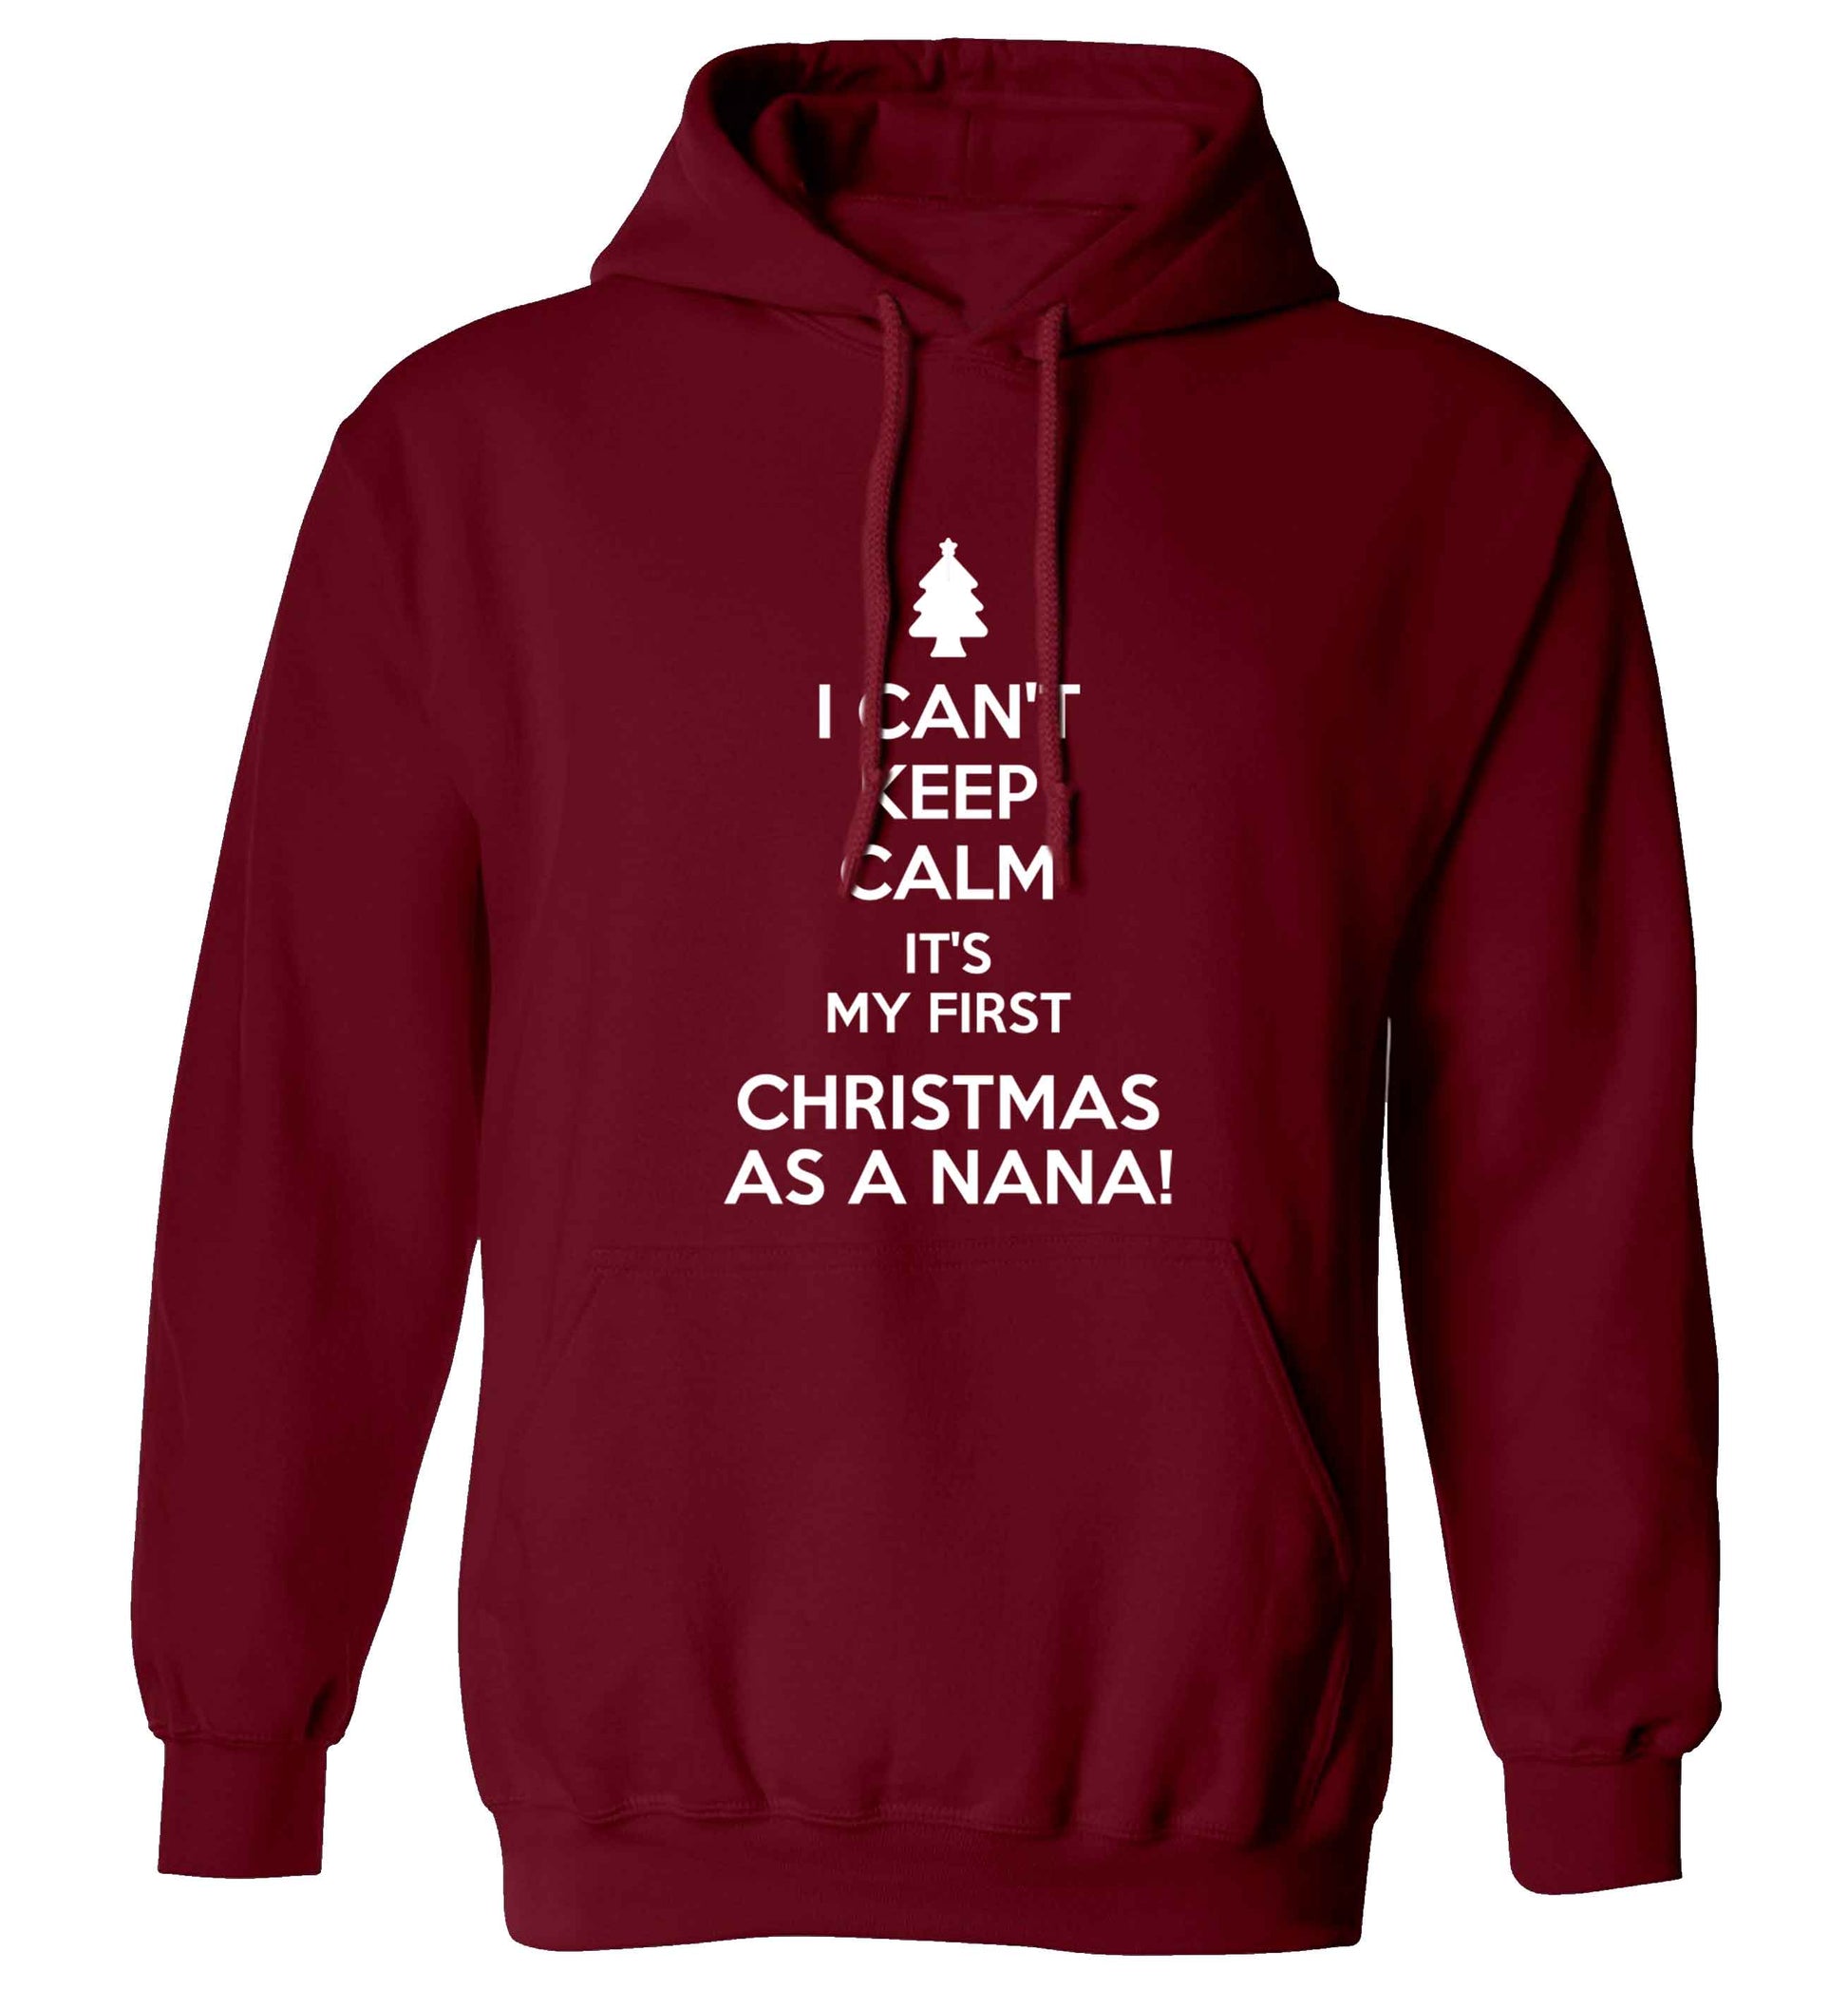 I can't keep calm it's my first Christmas as a nana! adults unisex maroon hoodie 2XL